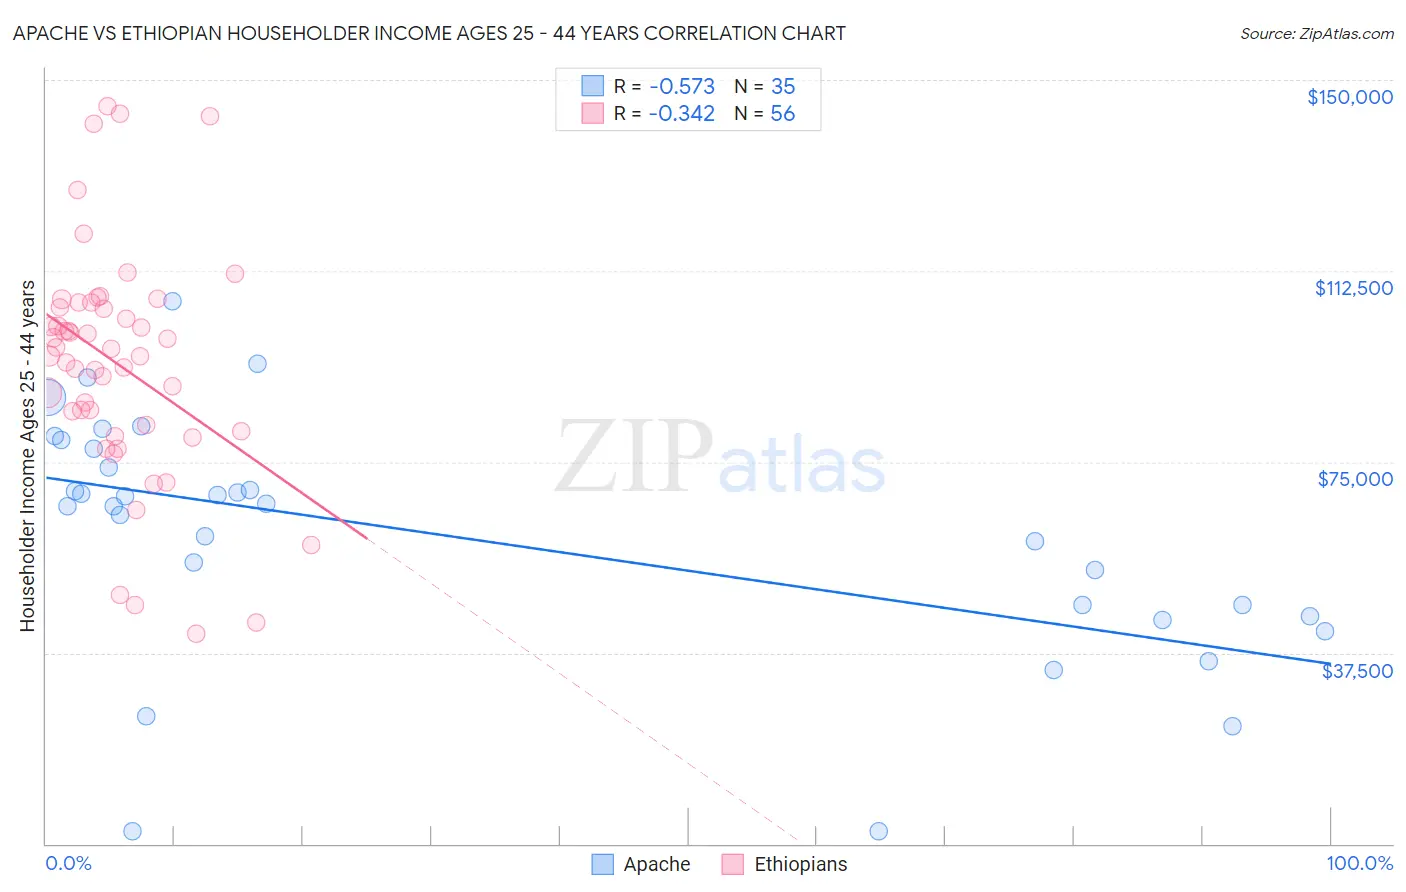 Apache vs Ethiopian Householder Income Ages 25 - 44 years